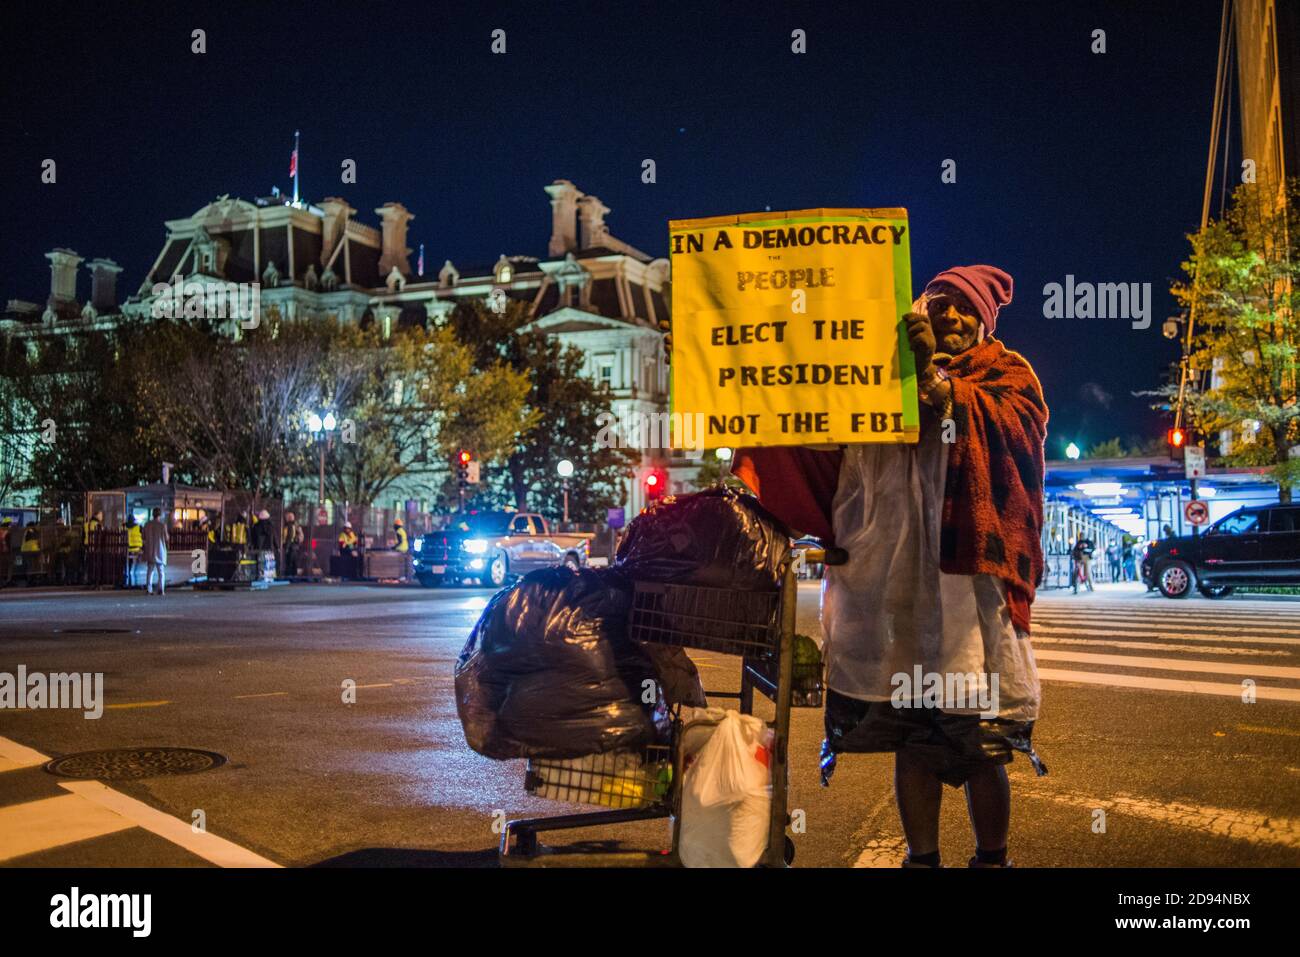 Washington DC USA. 2nd Nov 2020. Senior, Homeless, Black man, holds a sign that reads 'In a Democracy The People Elect The President Not The FBI'. The night before Election 2020.. Washington DC, USA. Yuriy Zahvoyskyy / Alamy Live News. Stock Photo